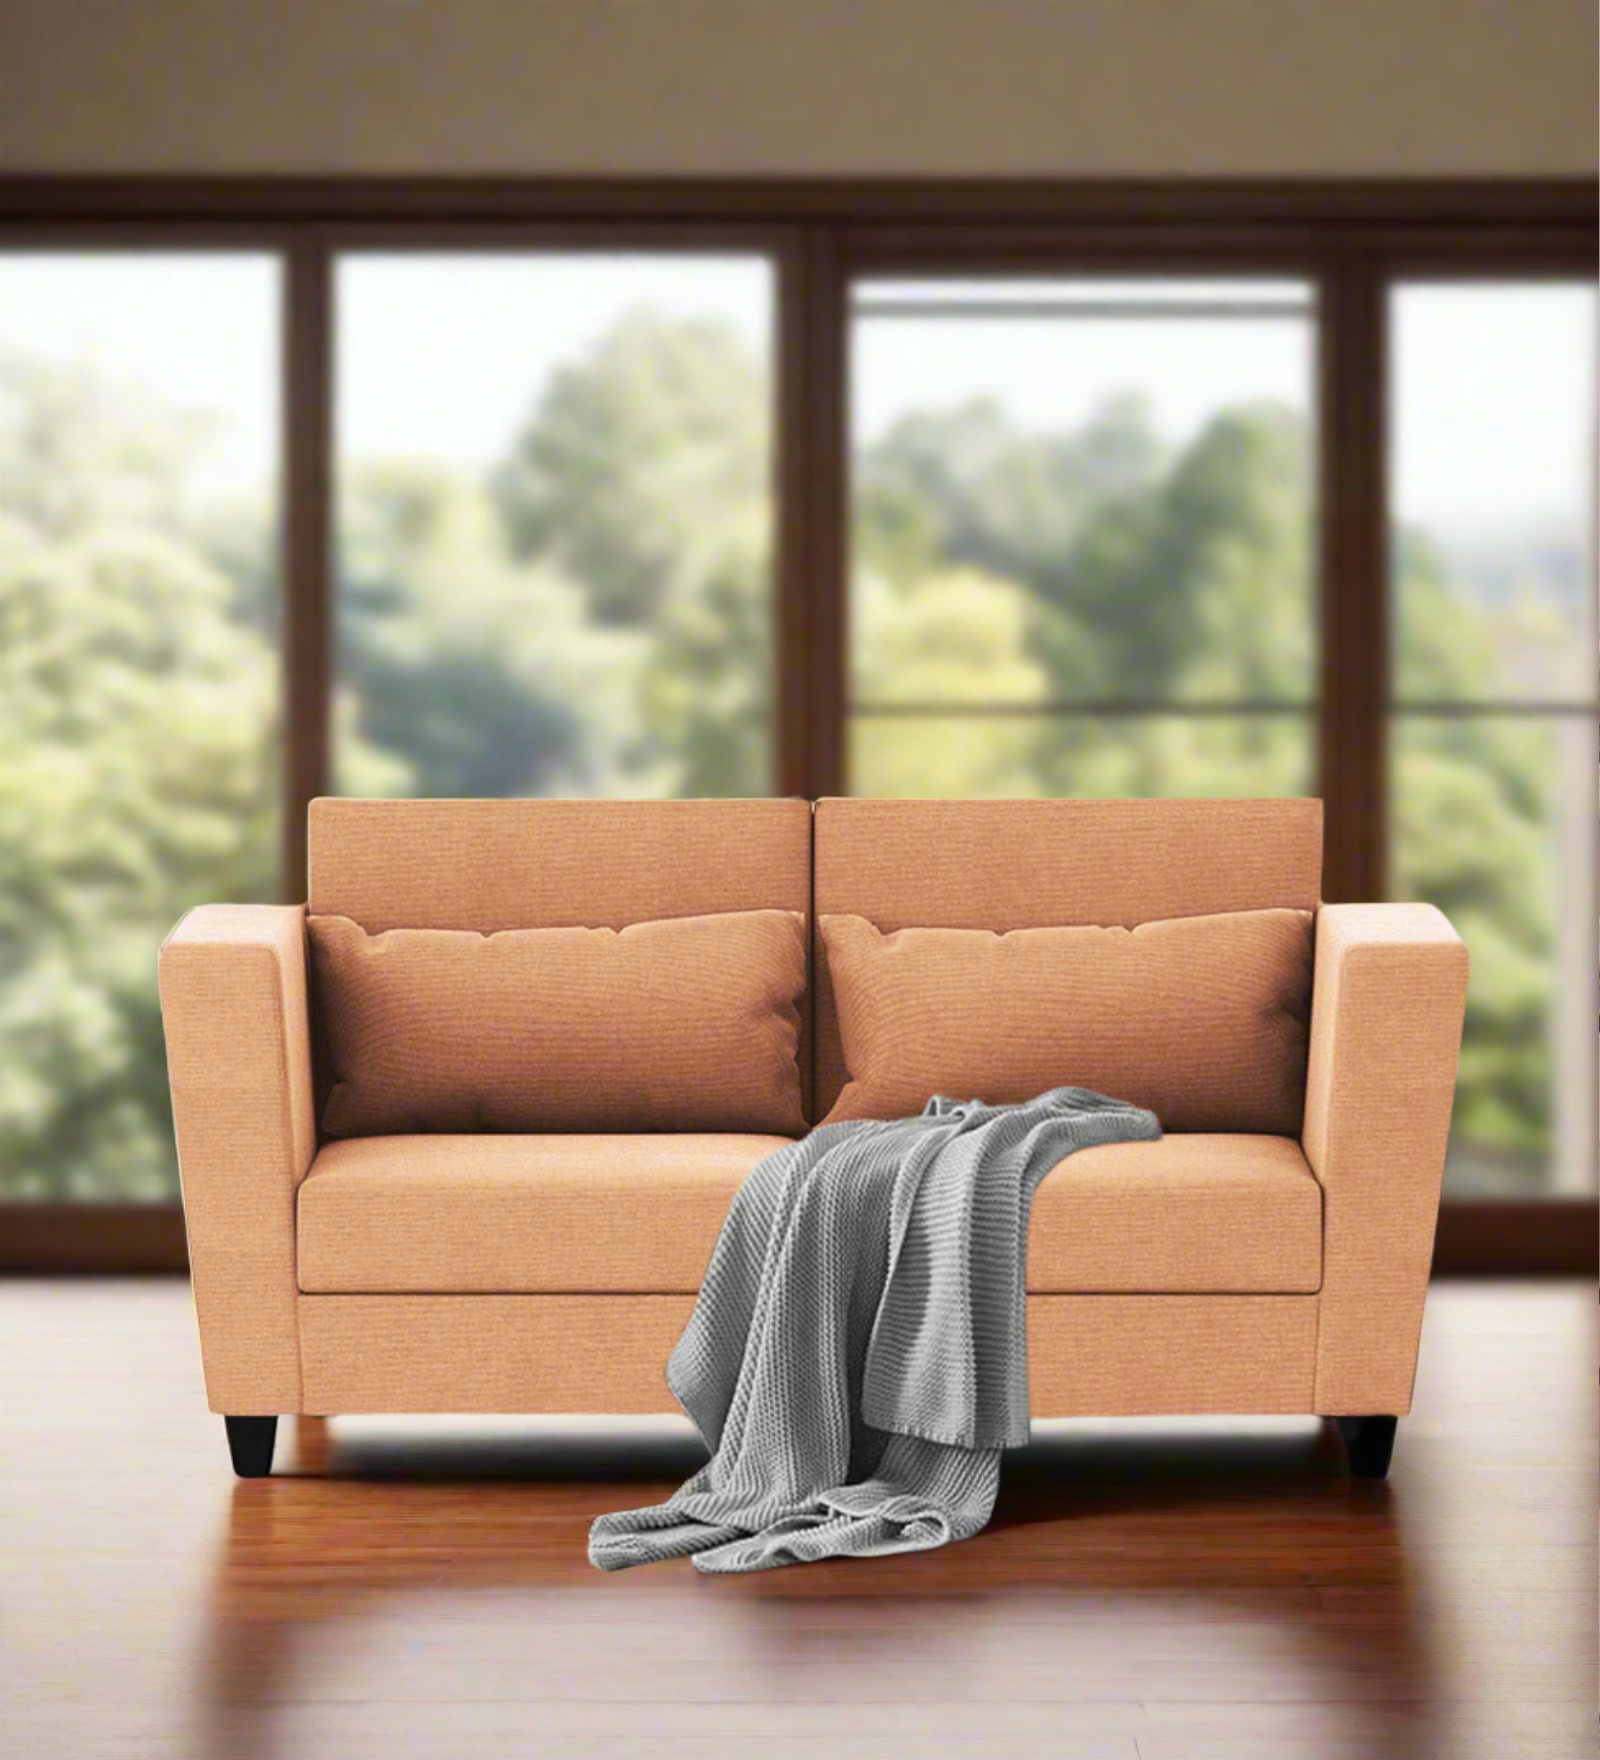 Tokyo Fabric 2 Seater Sofa in Cosmic Beige Colour